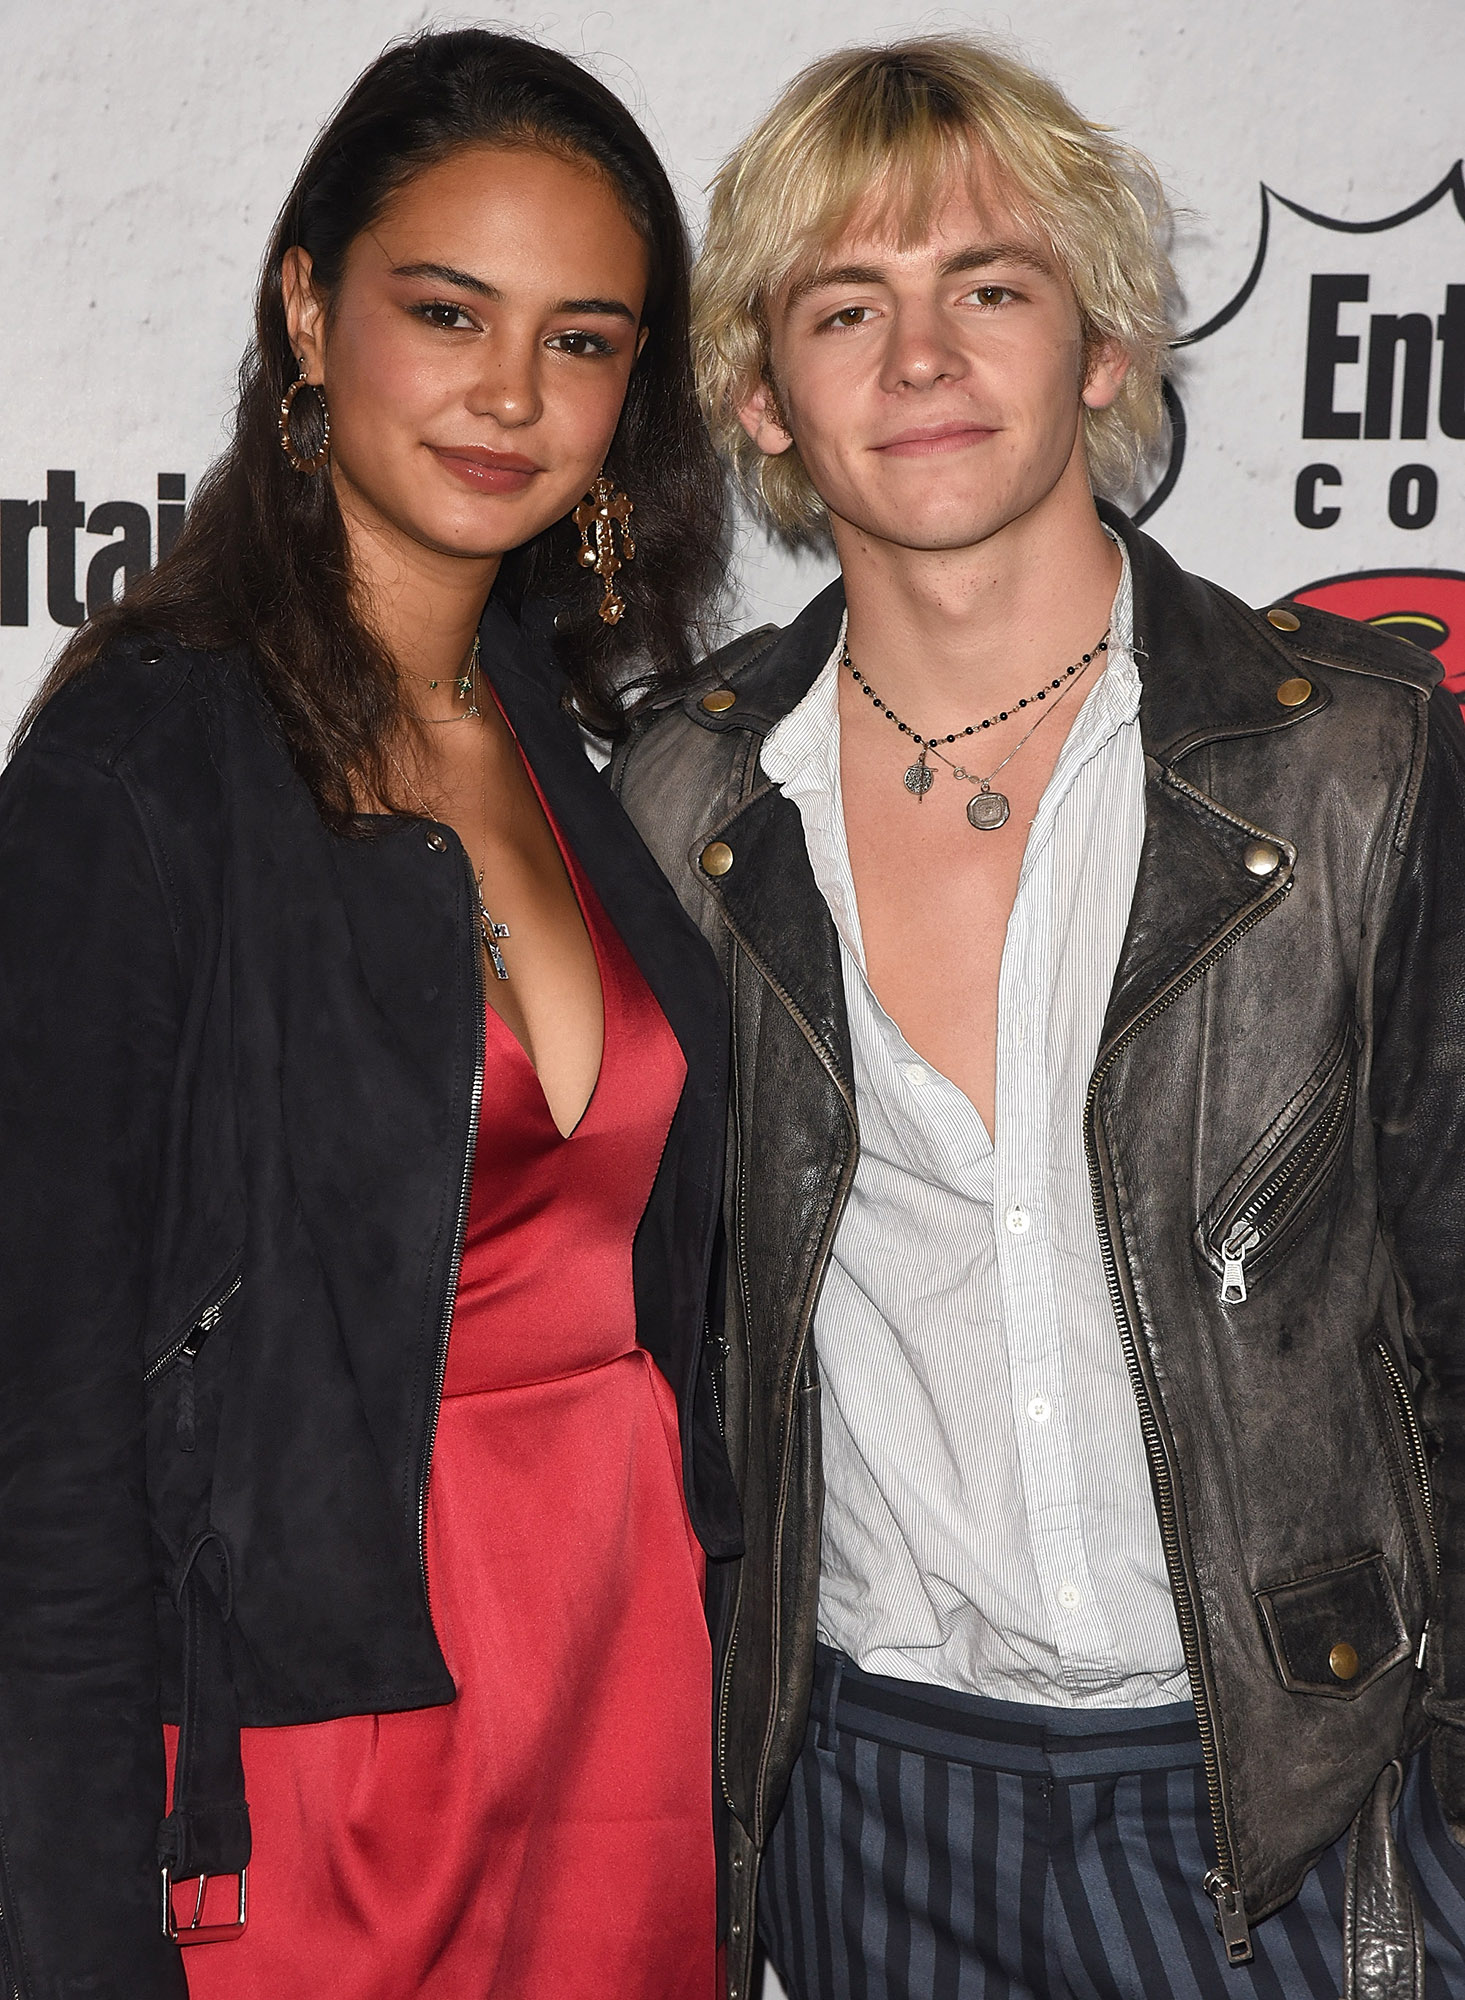 Ross Dating Courtney